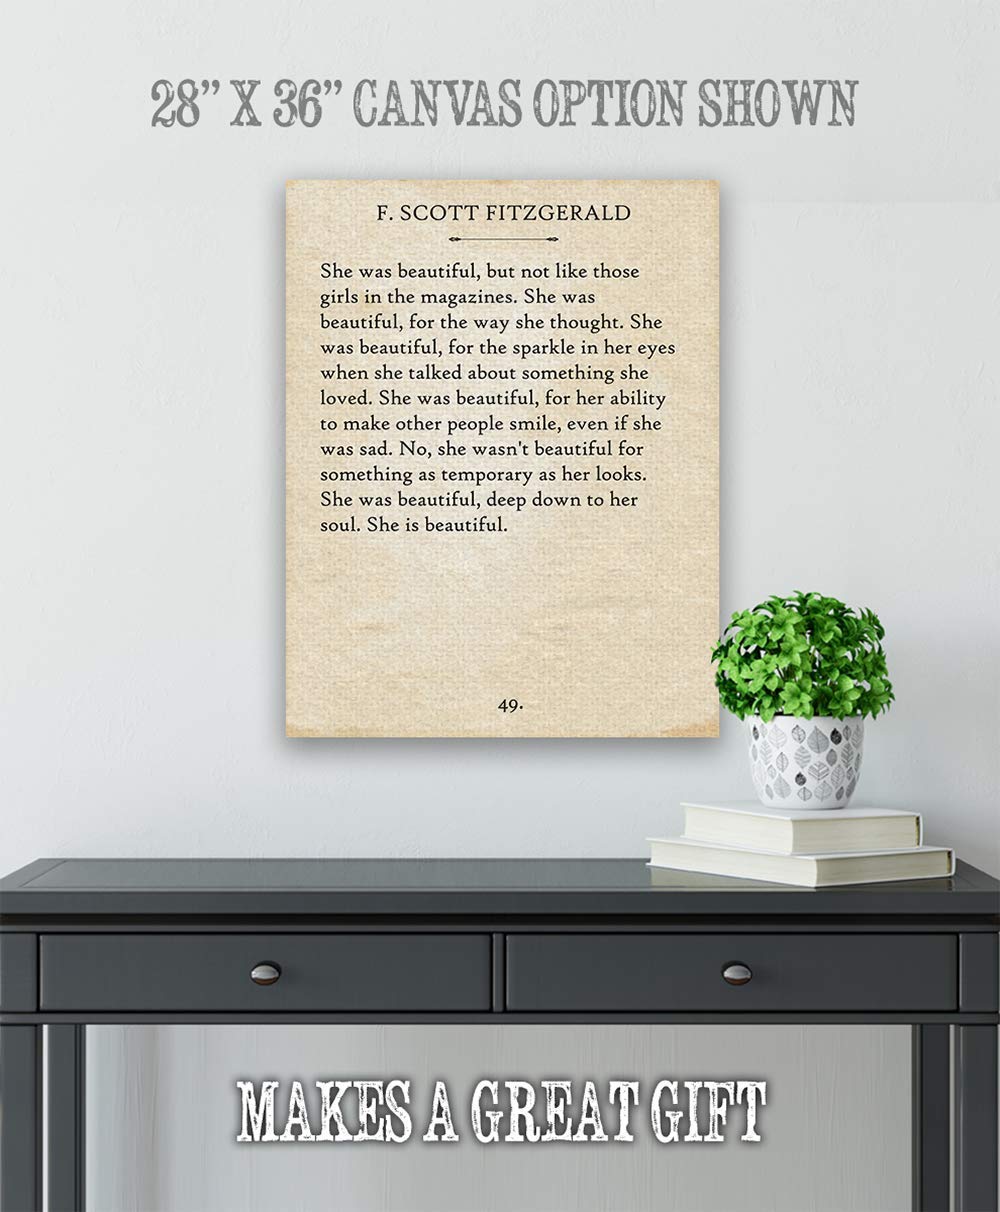 F. Scott Fitzgerald - She was Beautiful - Inspirational Home and Room Decorations, Woman Love Quotes Decor, Gift for Wedding and Book Lovers, Choose Unframed Classic Book Page Poster or Canvas